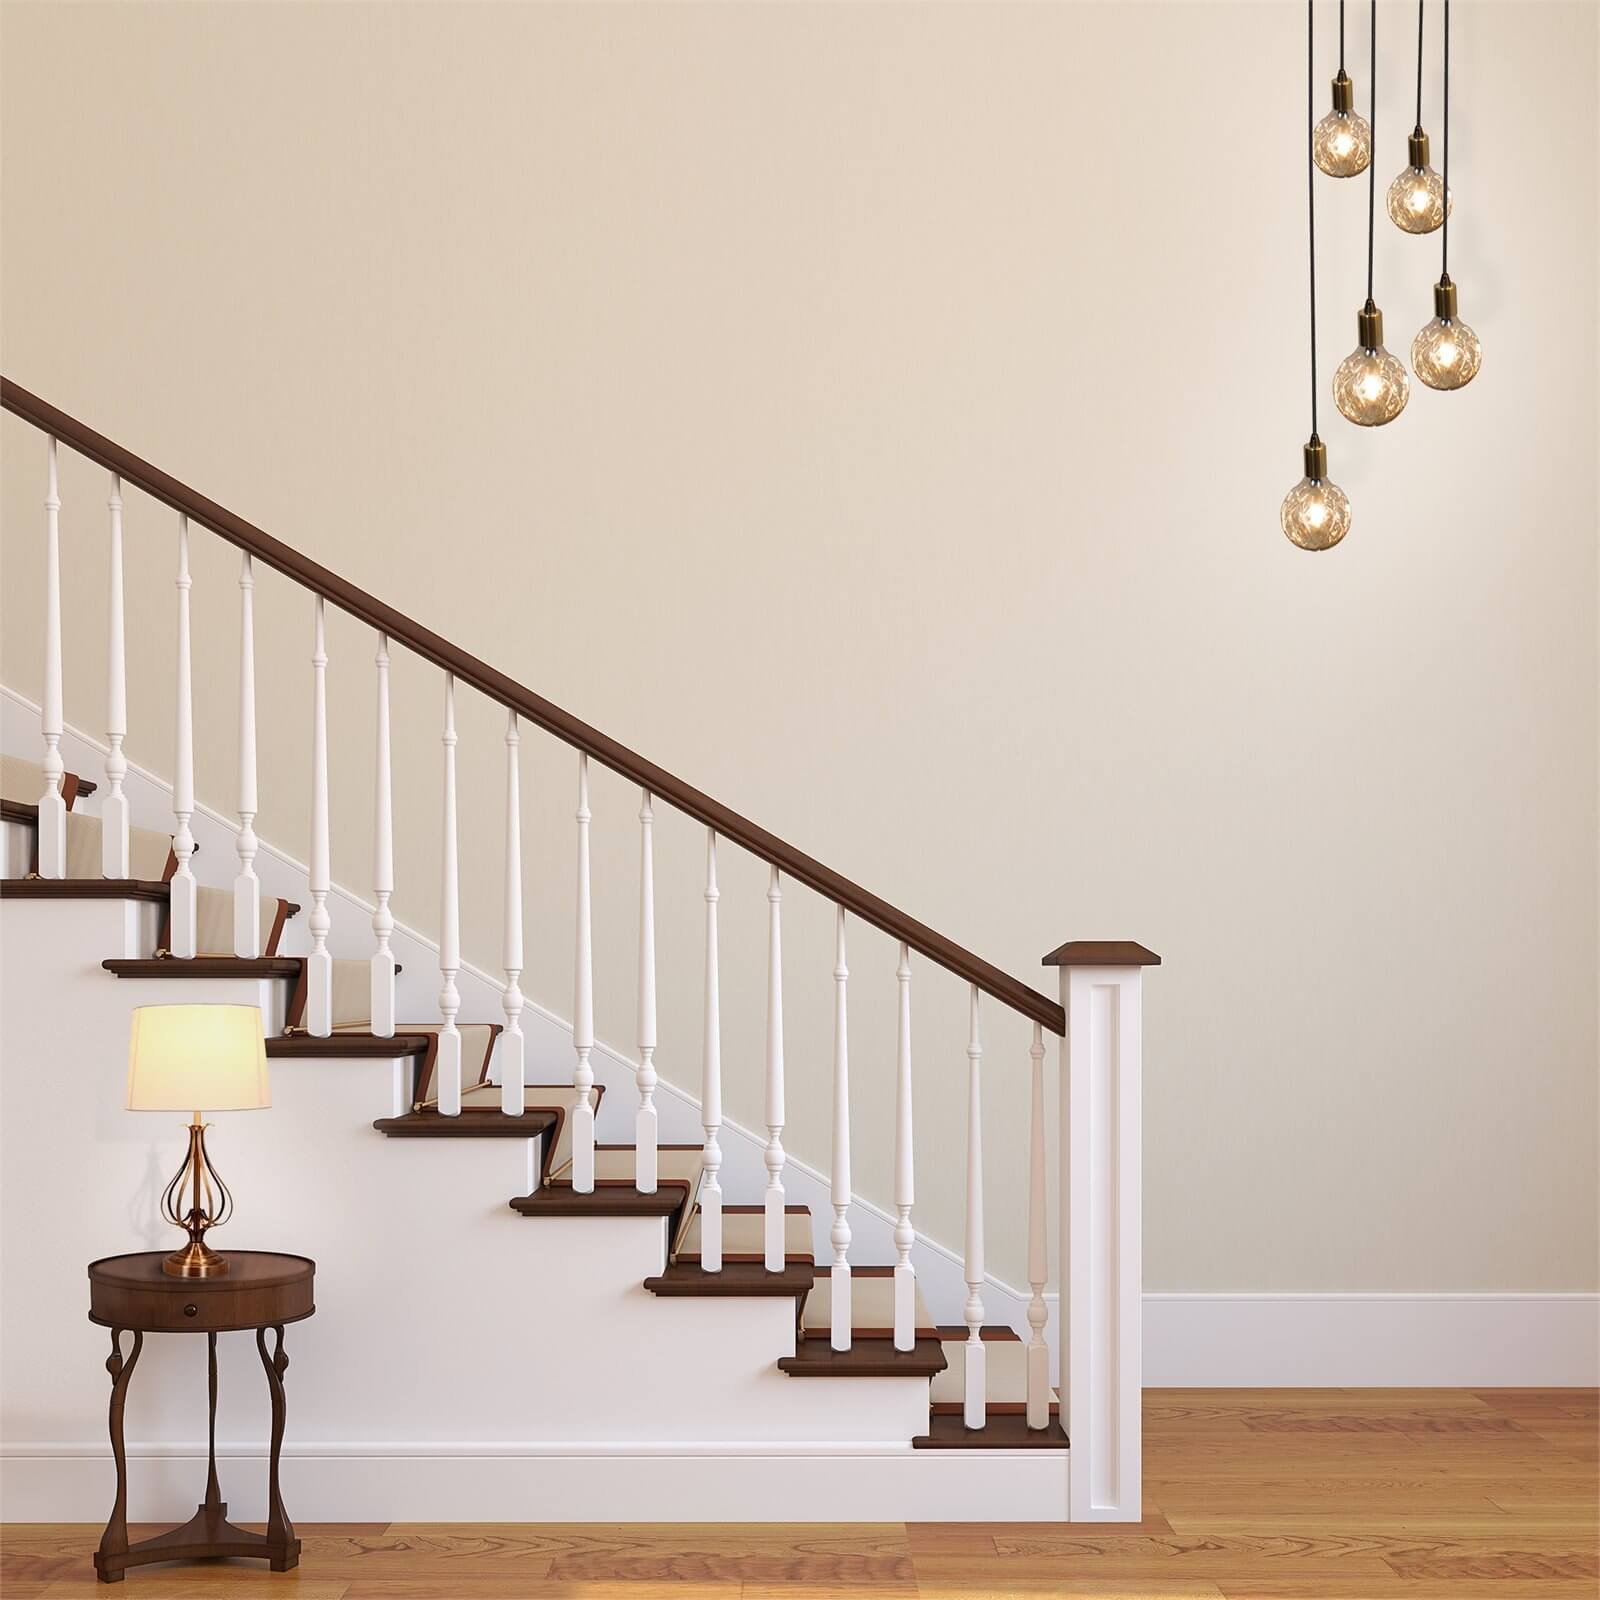 Cognac 5 Light Fitting - Black and Gold